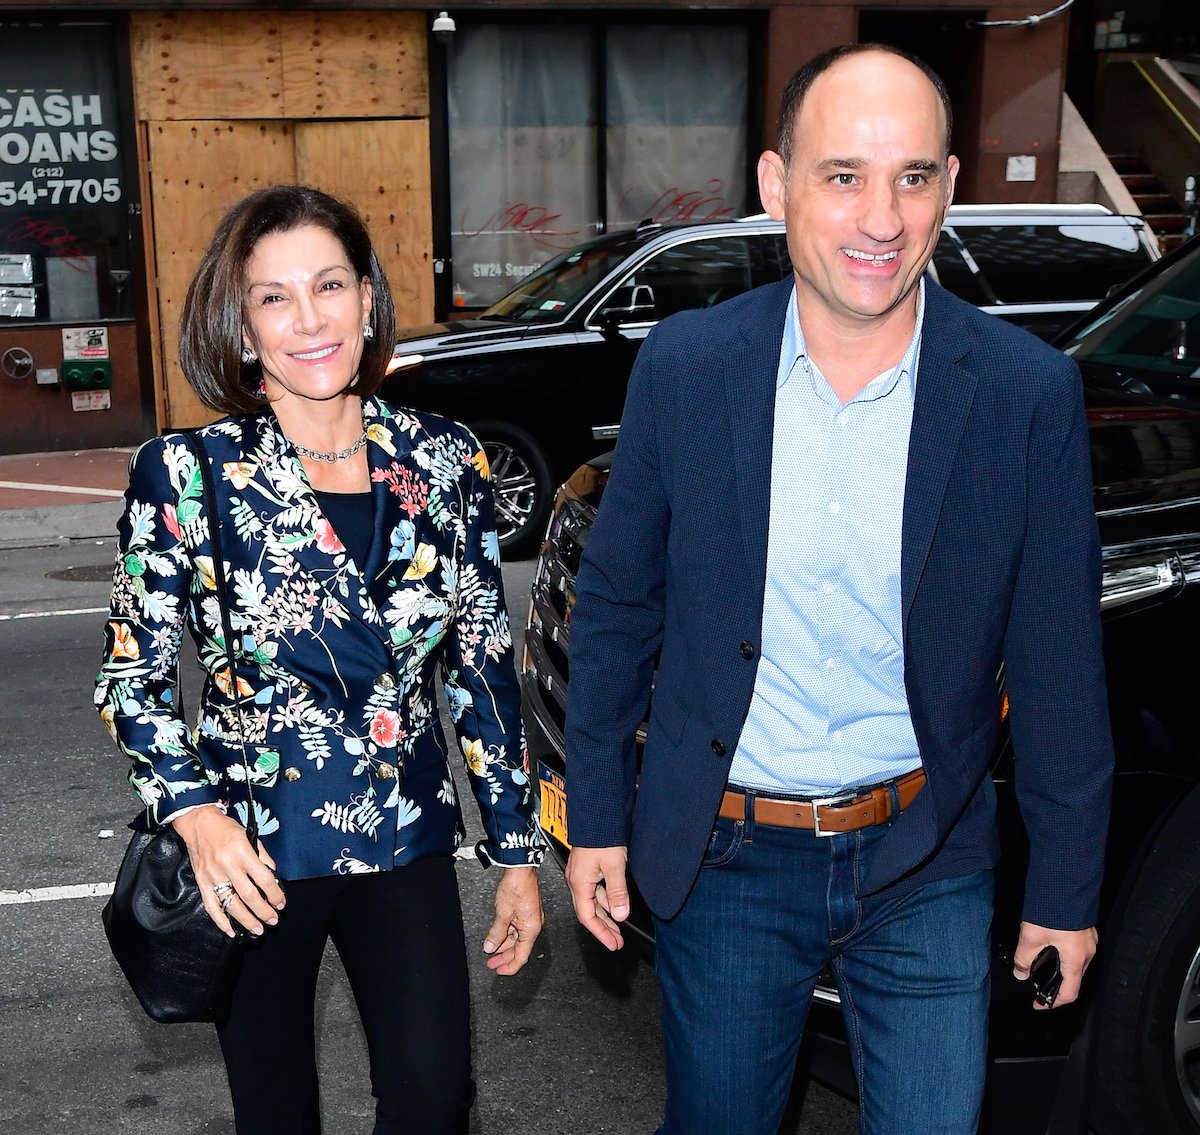 Hilary Farr and David Visentin arrive for a TODAY show appearance in 2019